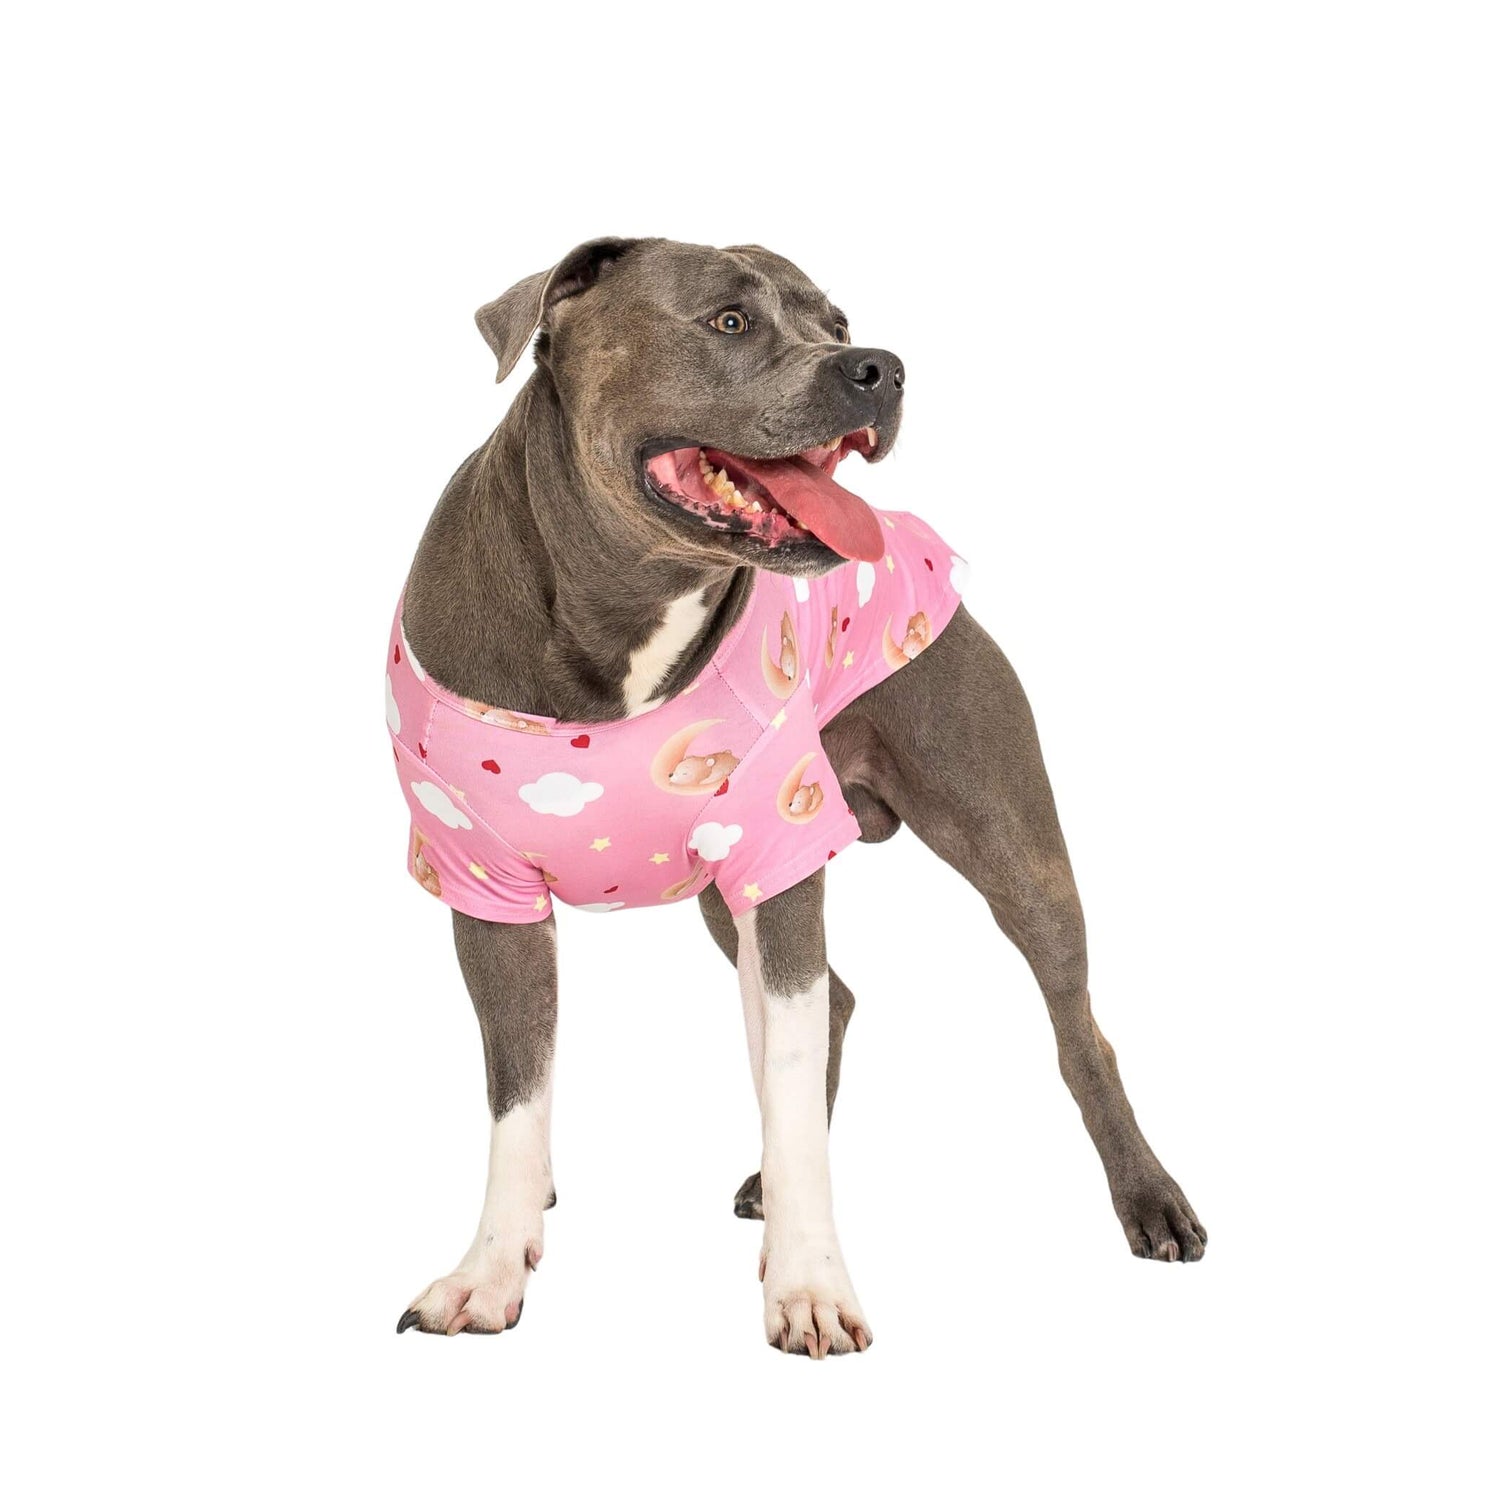 An American staffy standing side on wearing a Vibrant Hound Lil dreamer pink pyjamas for dogs.